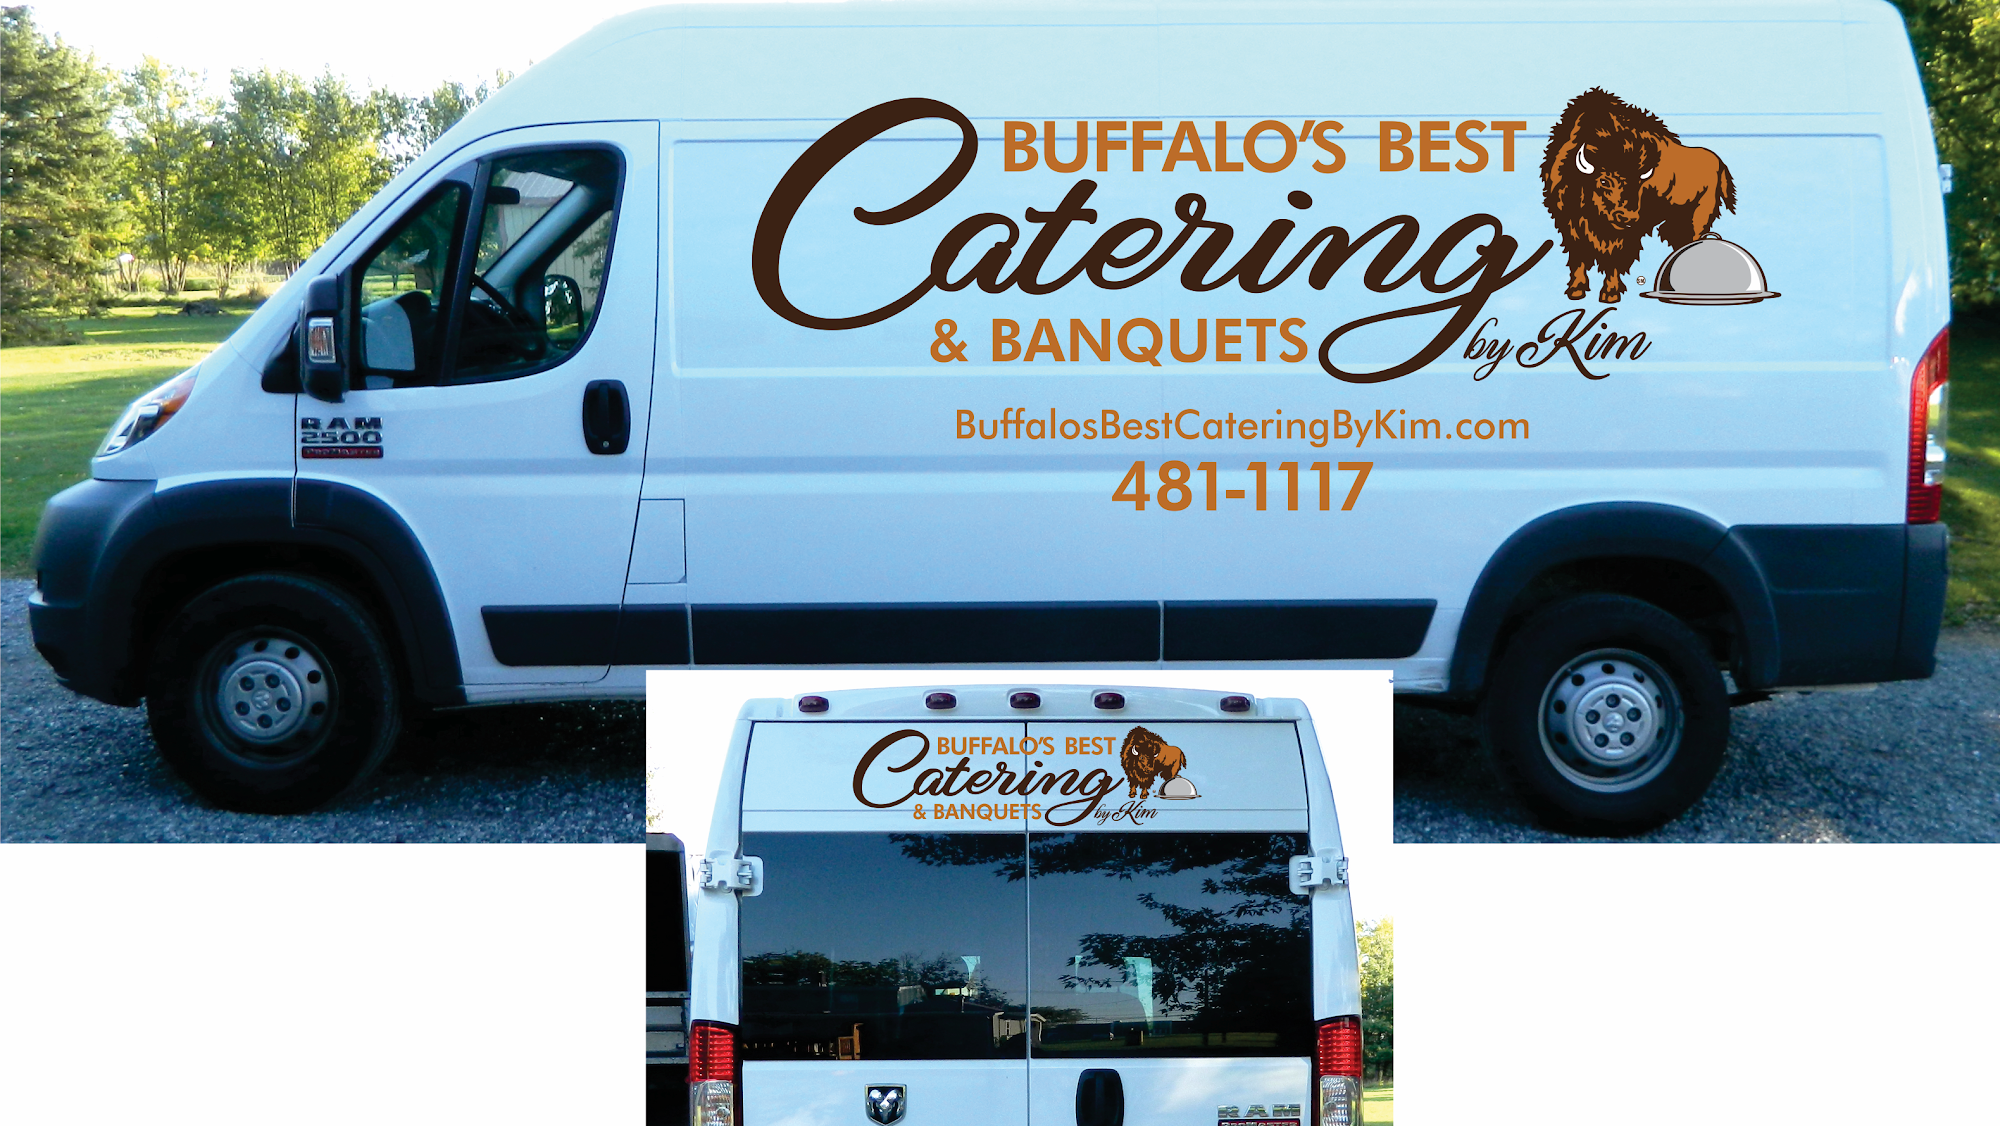 Buffalo's Best Catering By Kim